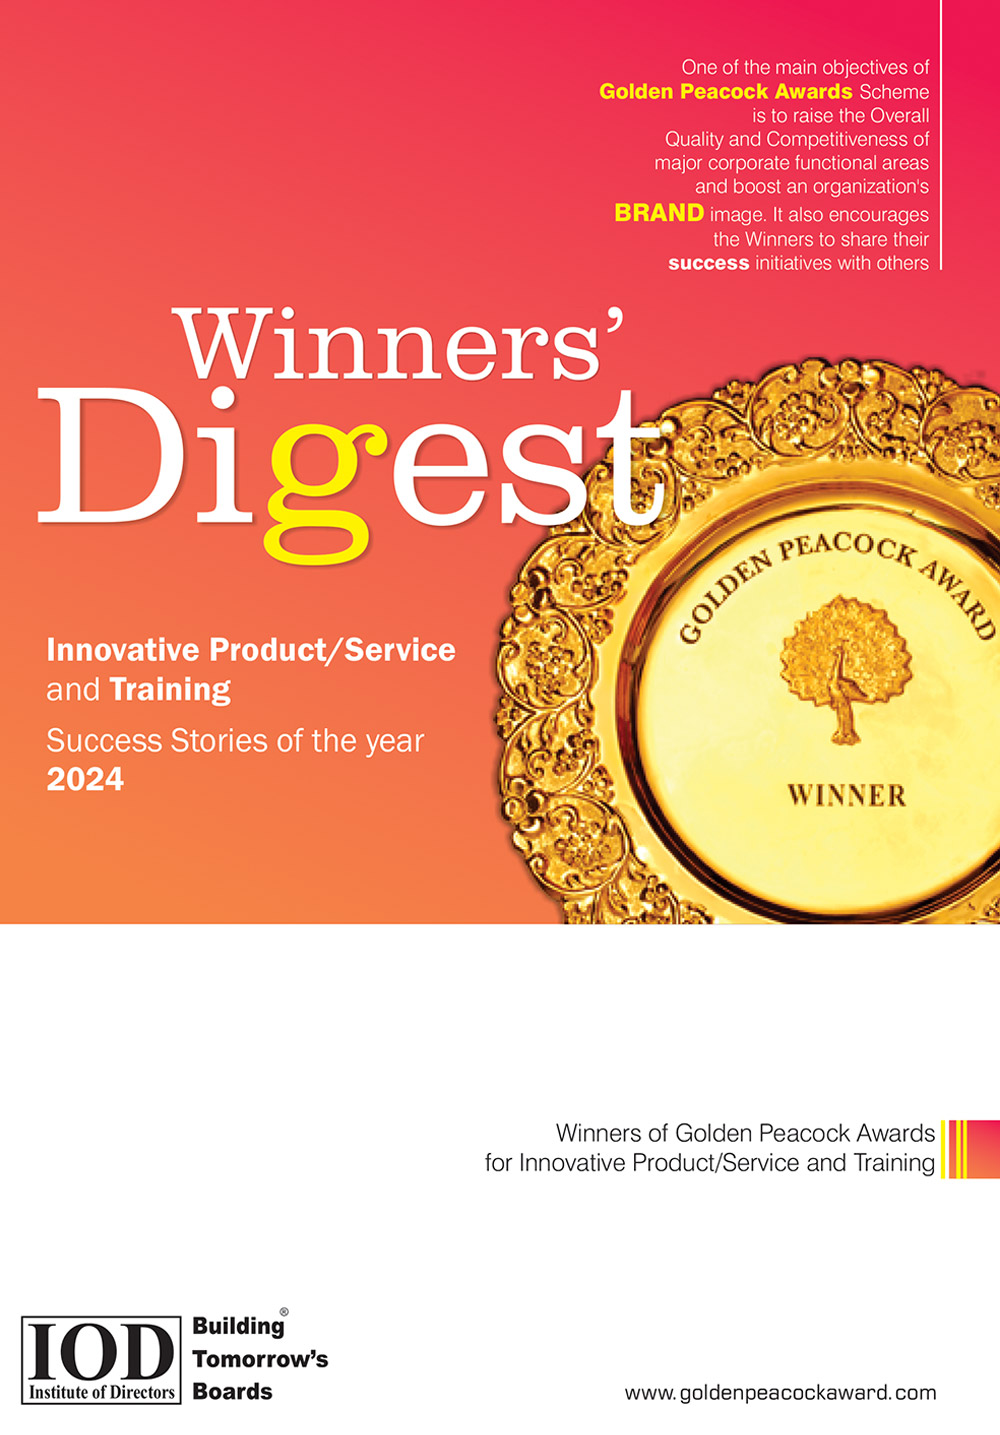 2024 - Winners' Digest - 
Innovative Product/Service and Training